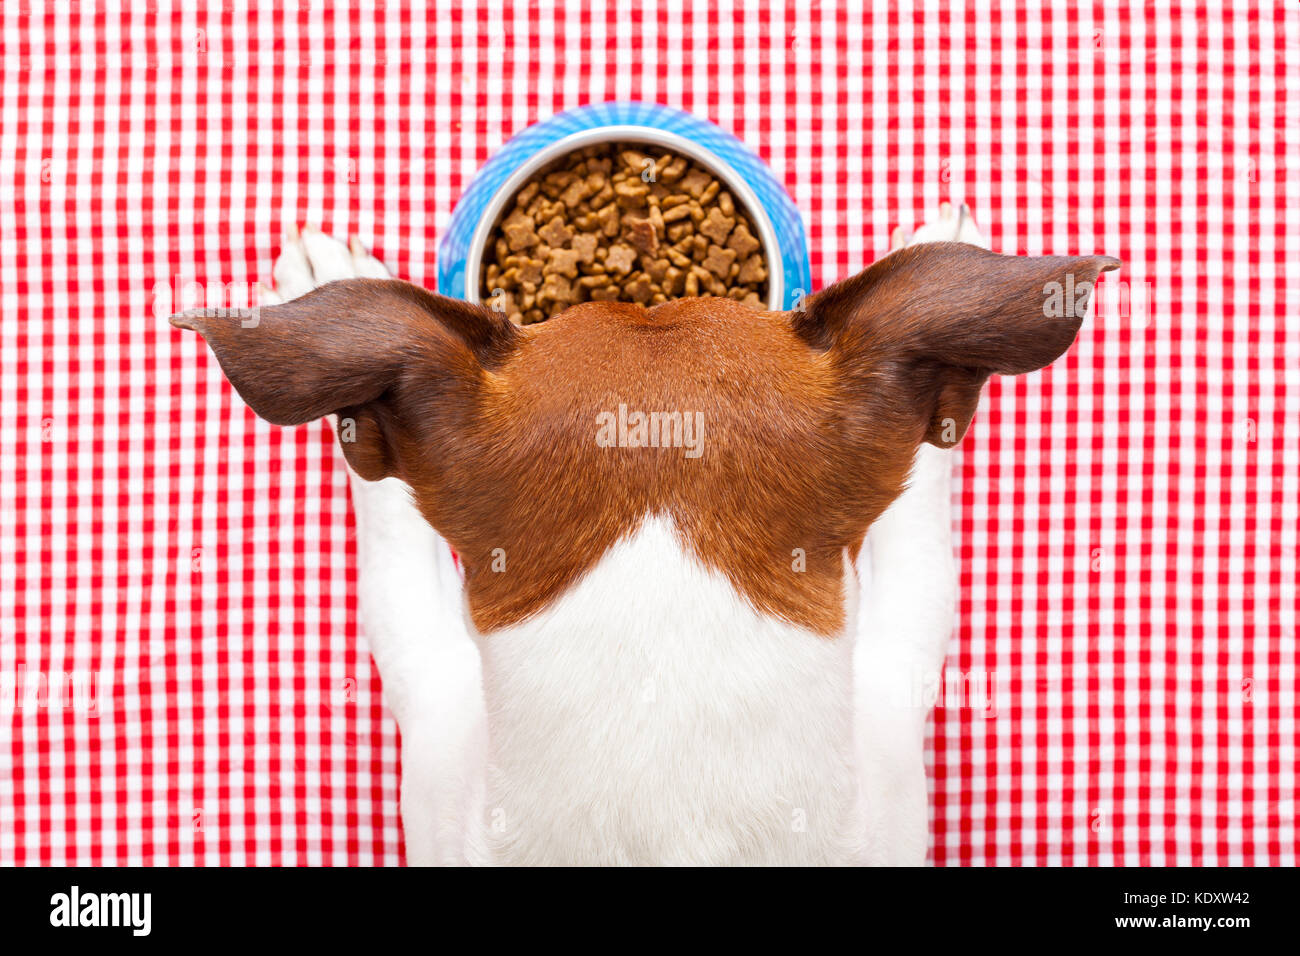 dog food bowl on tablecloth,paws and head of a dog Stock Photo